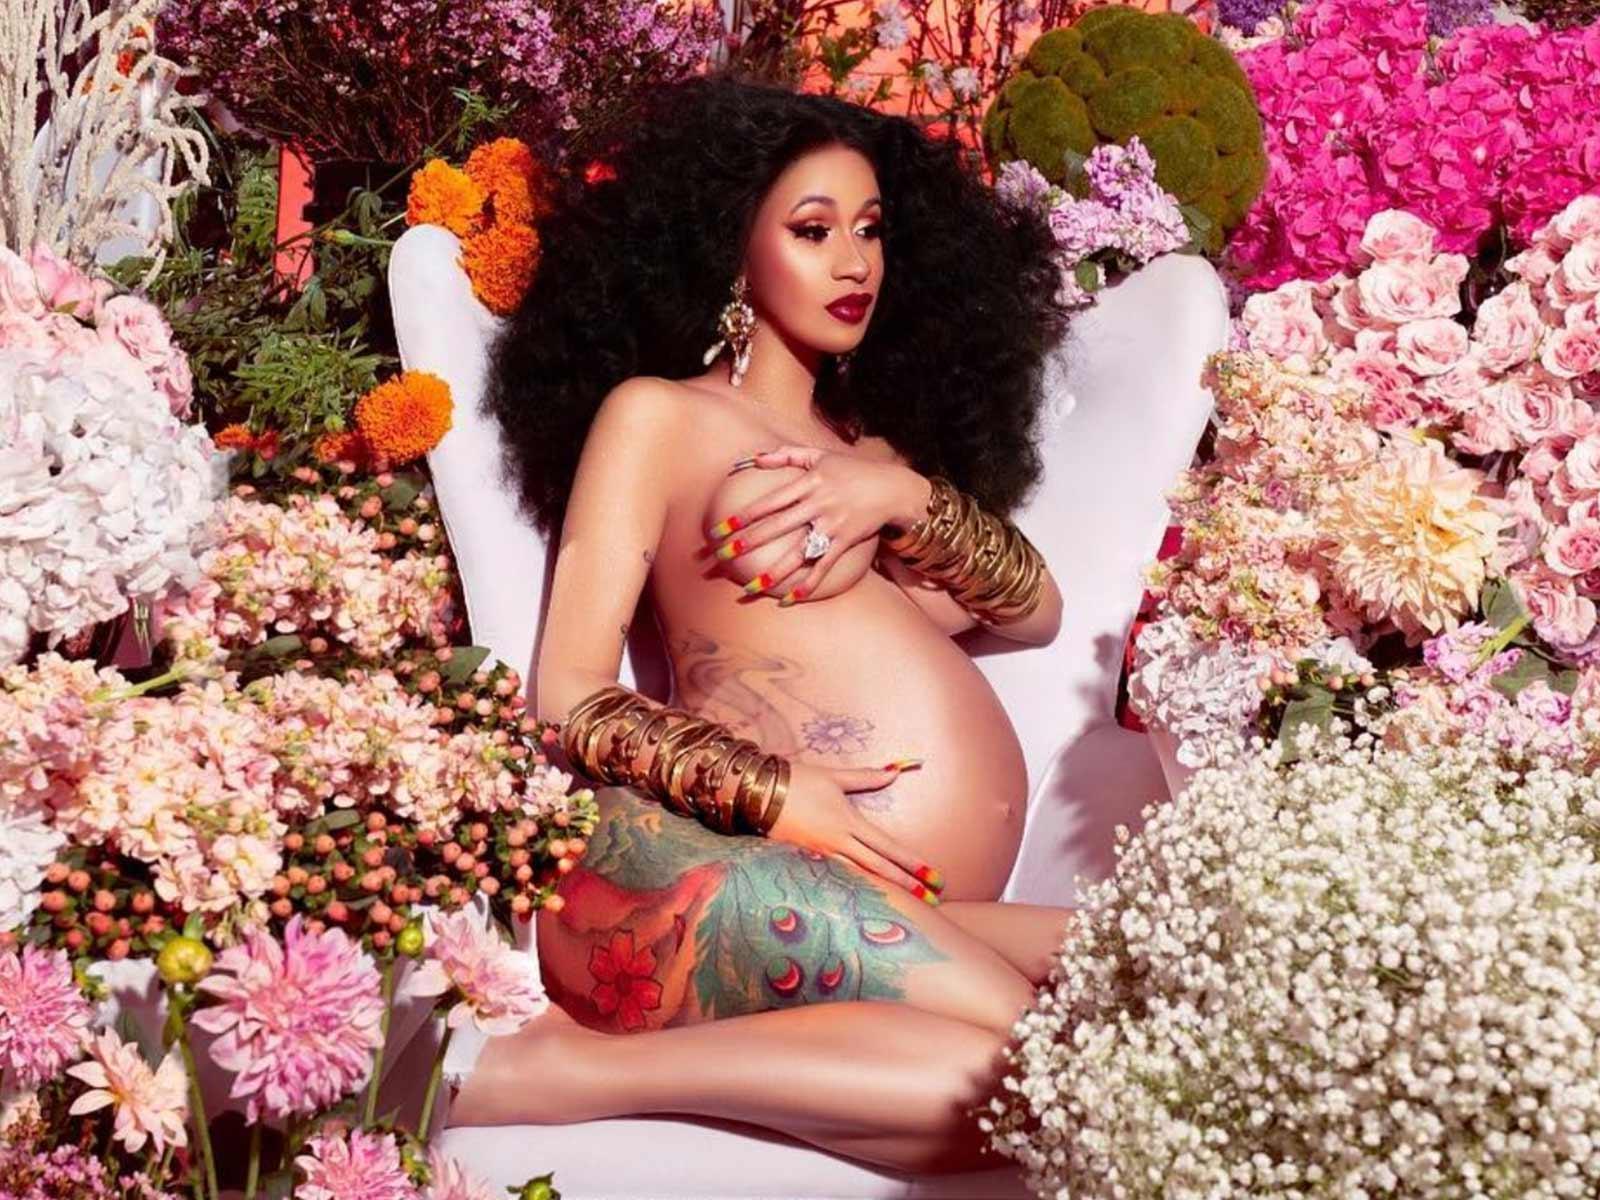 Cardi B and Offset Welcome Their First Child Into the World